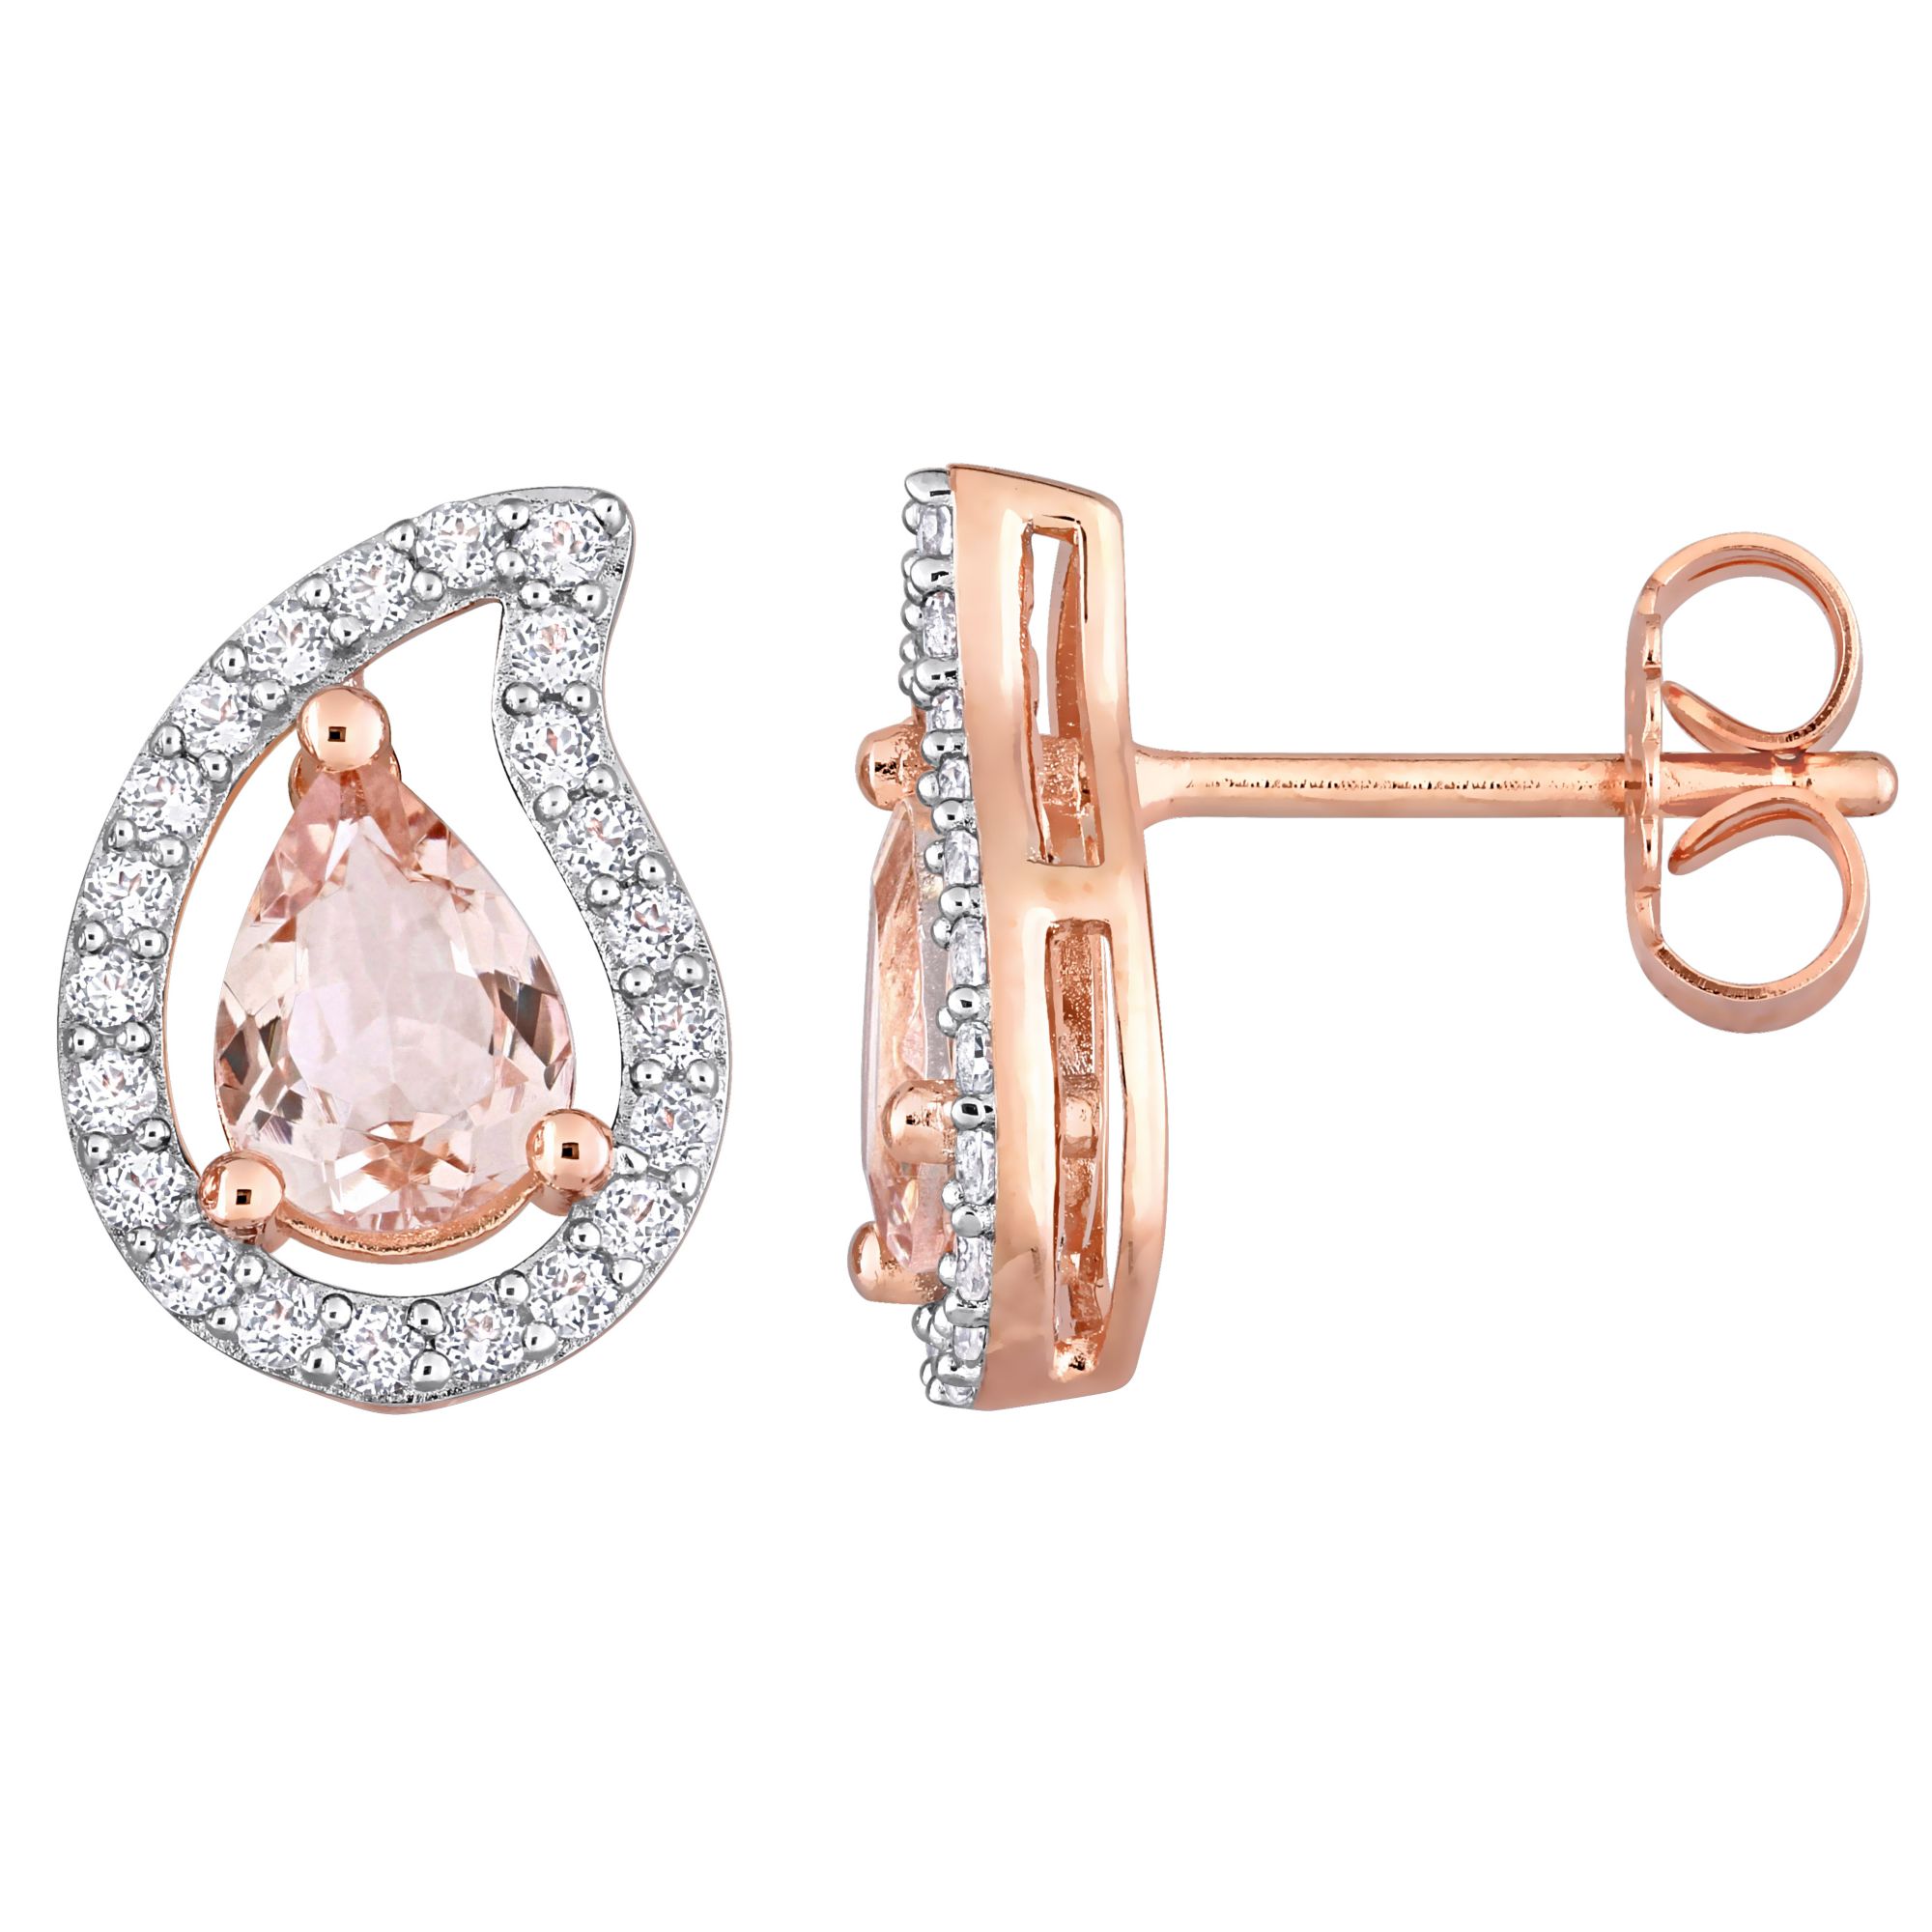 1.5 ct. t.g.w Morganite and White Topaz Teardrop Stud Earrings in Rose  Plated Sterling Silver